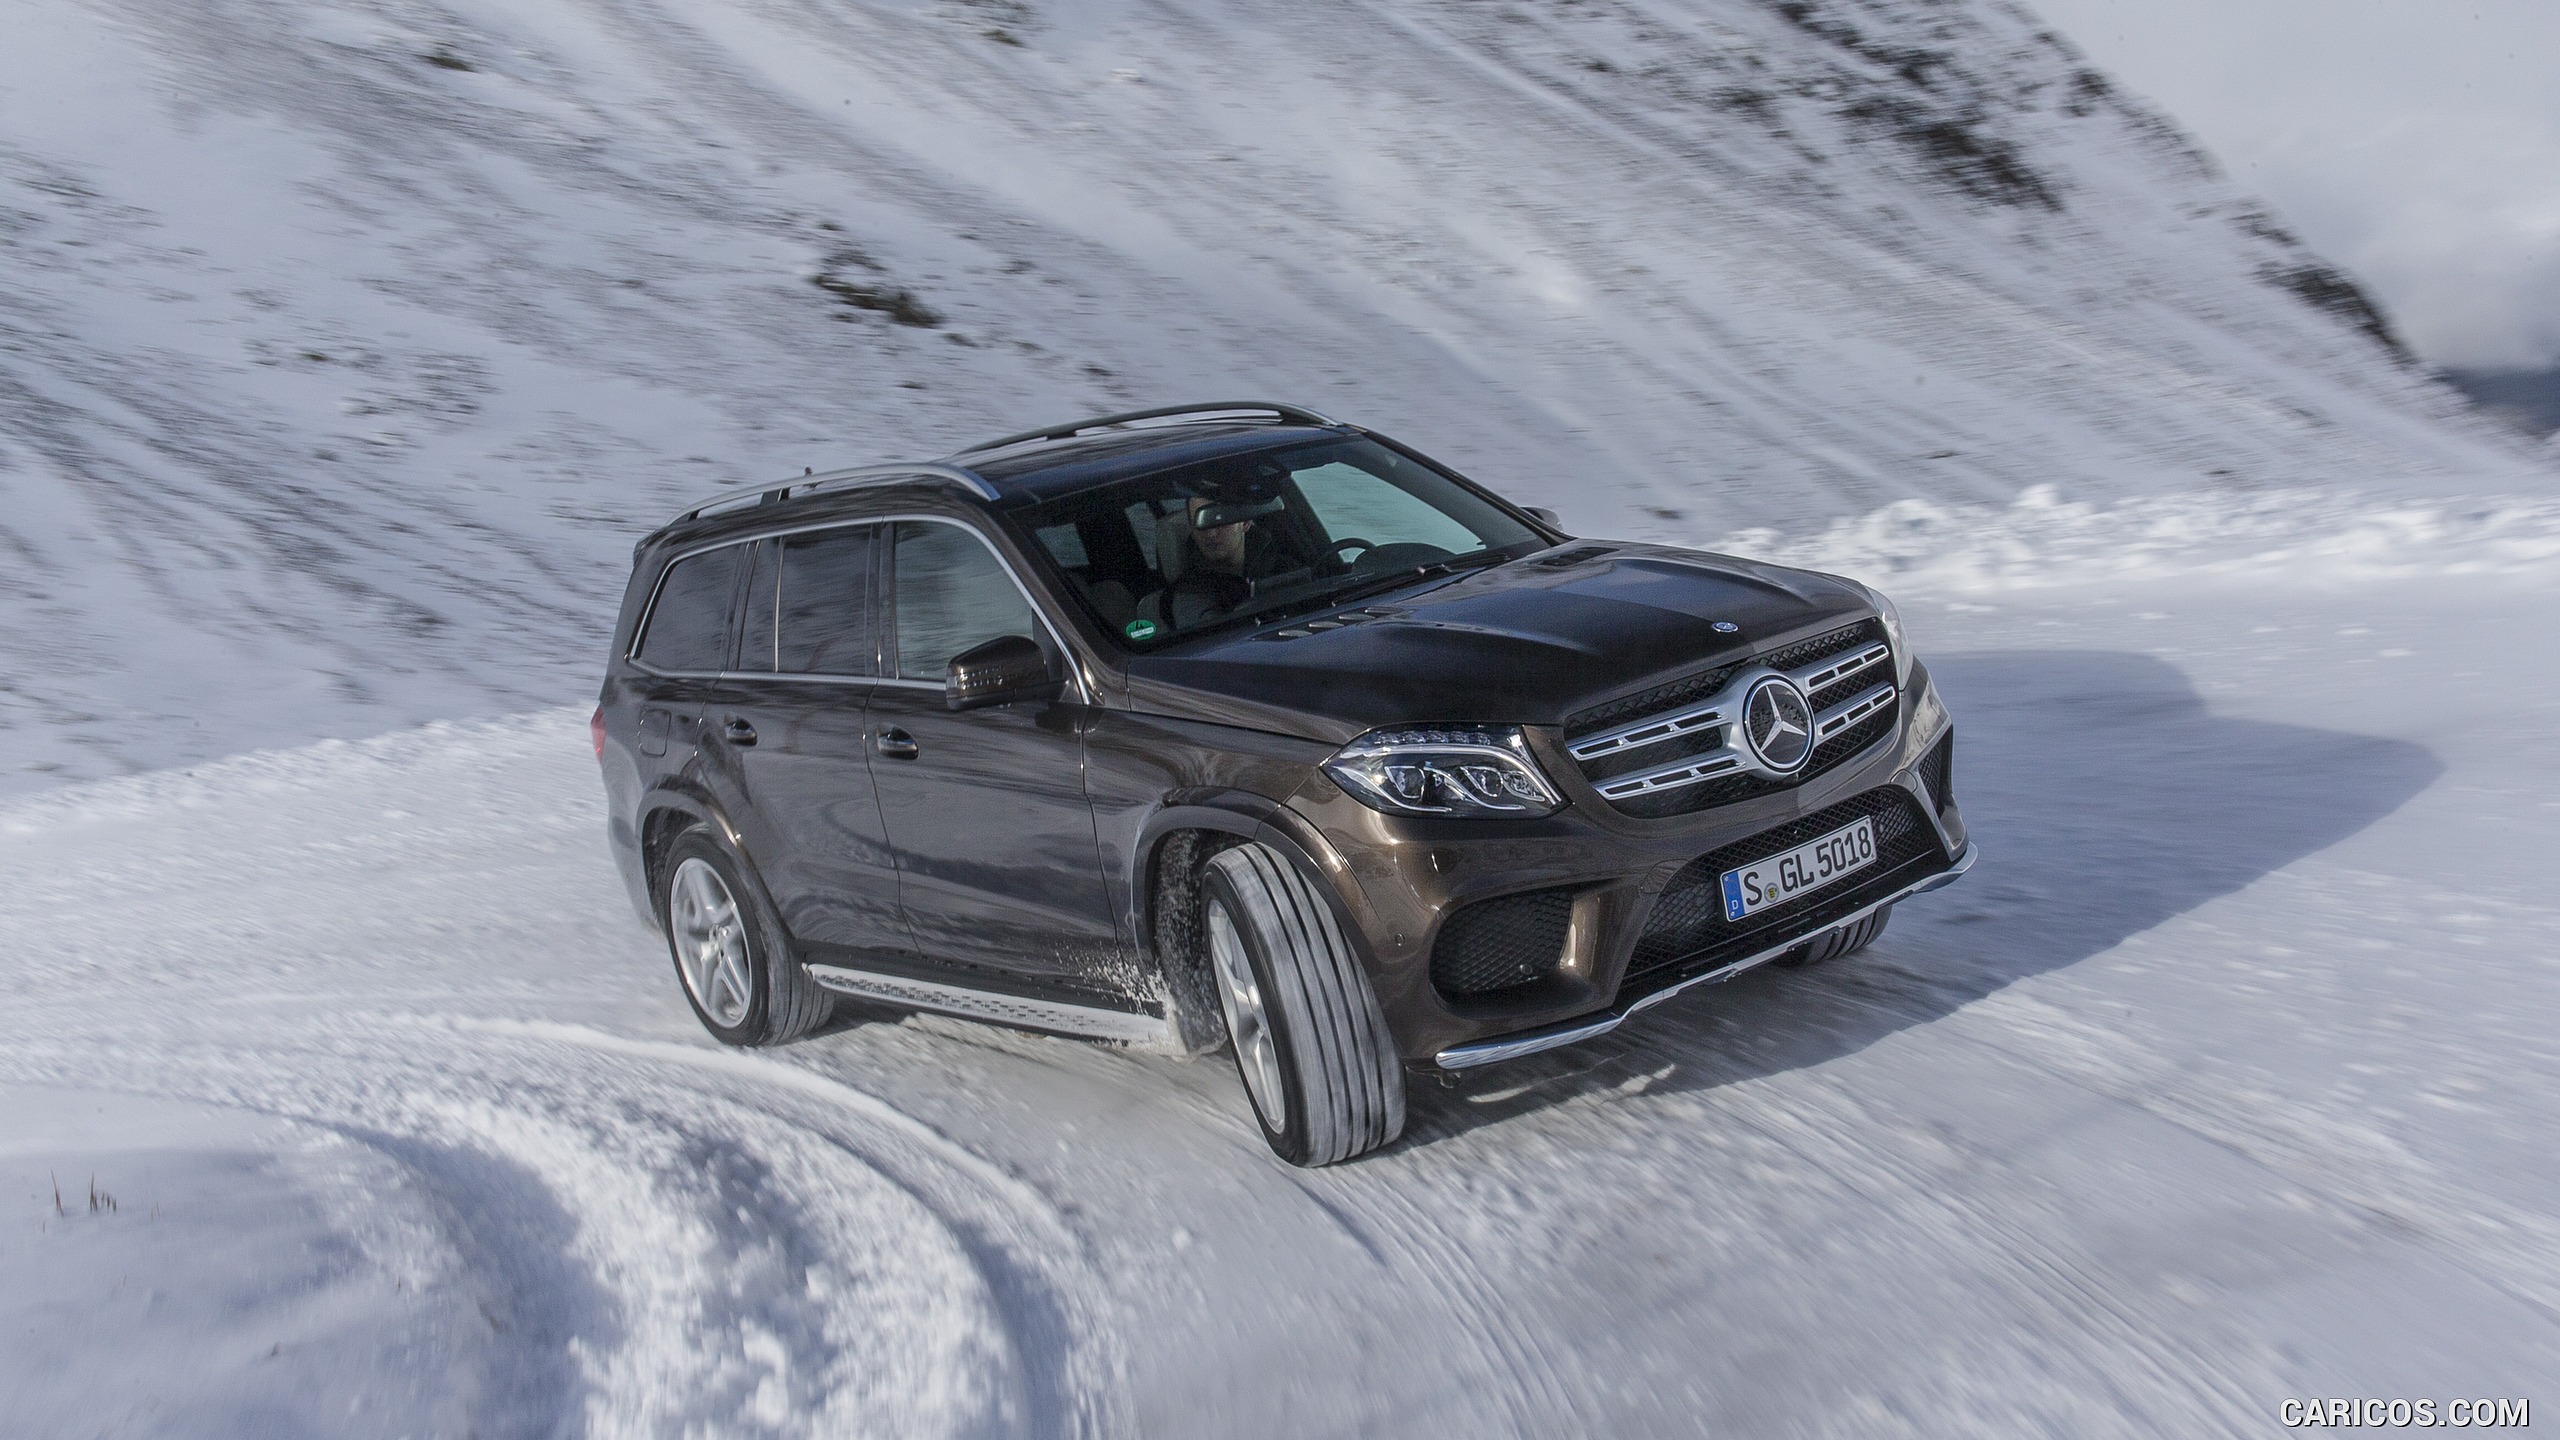 2017 Mercedes-Benz GLS 350d 4MATIC AMG Line in Snow - Front, #182 of 255